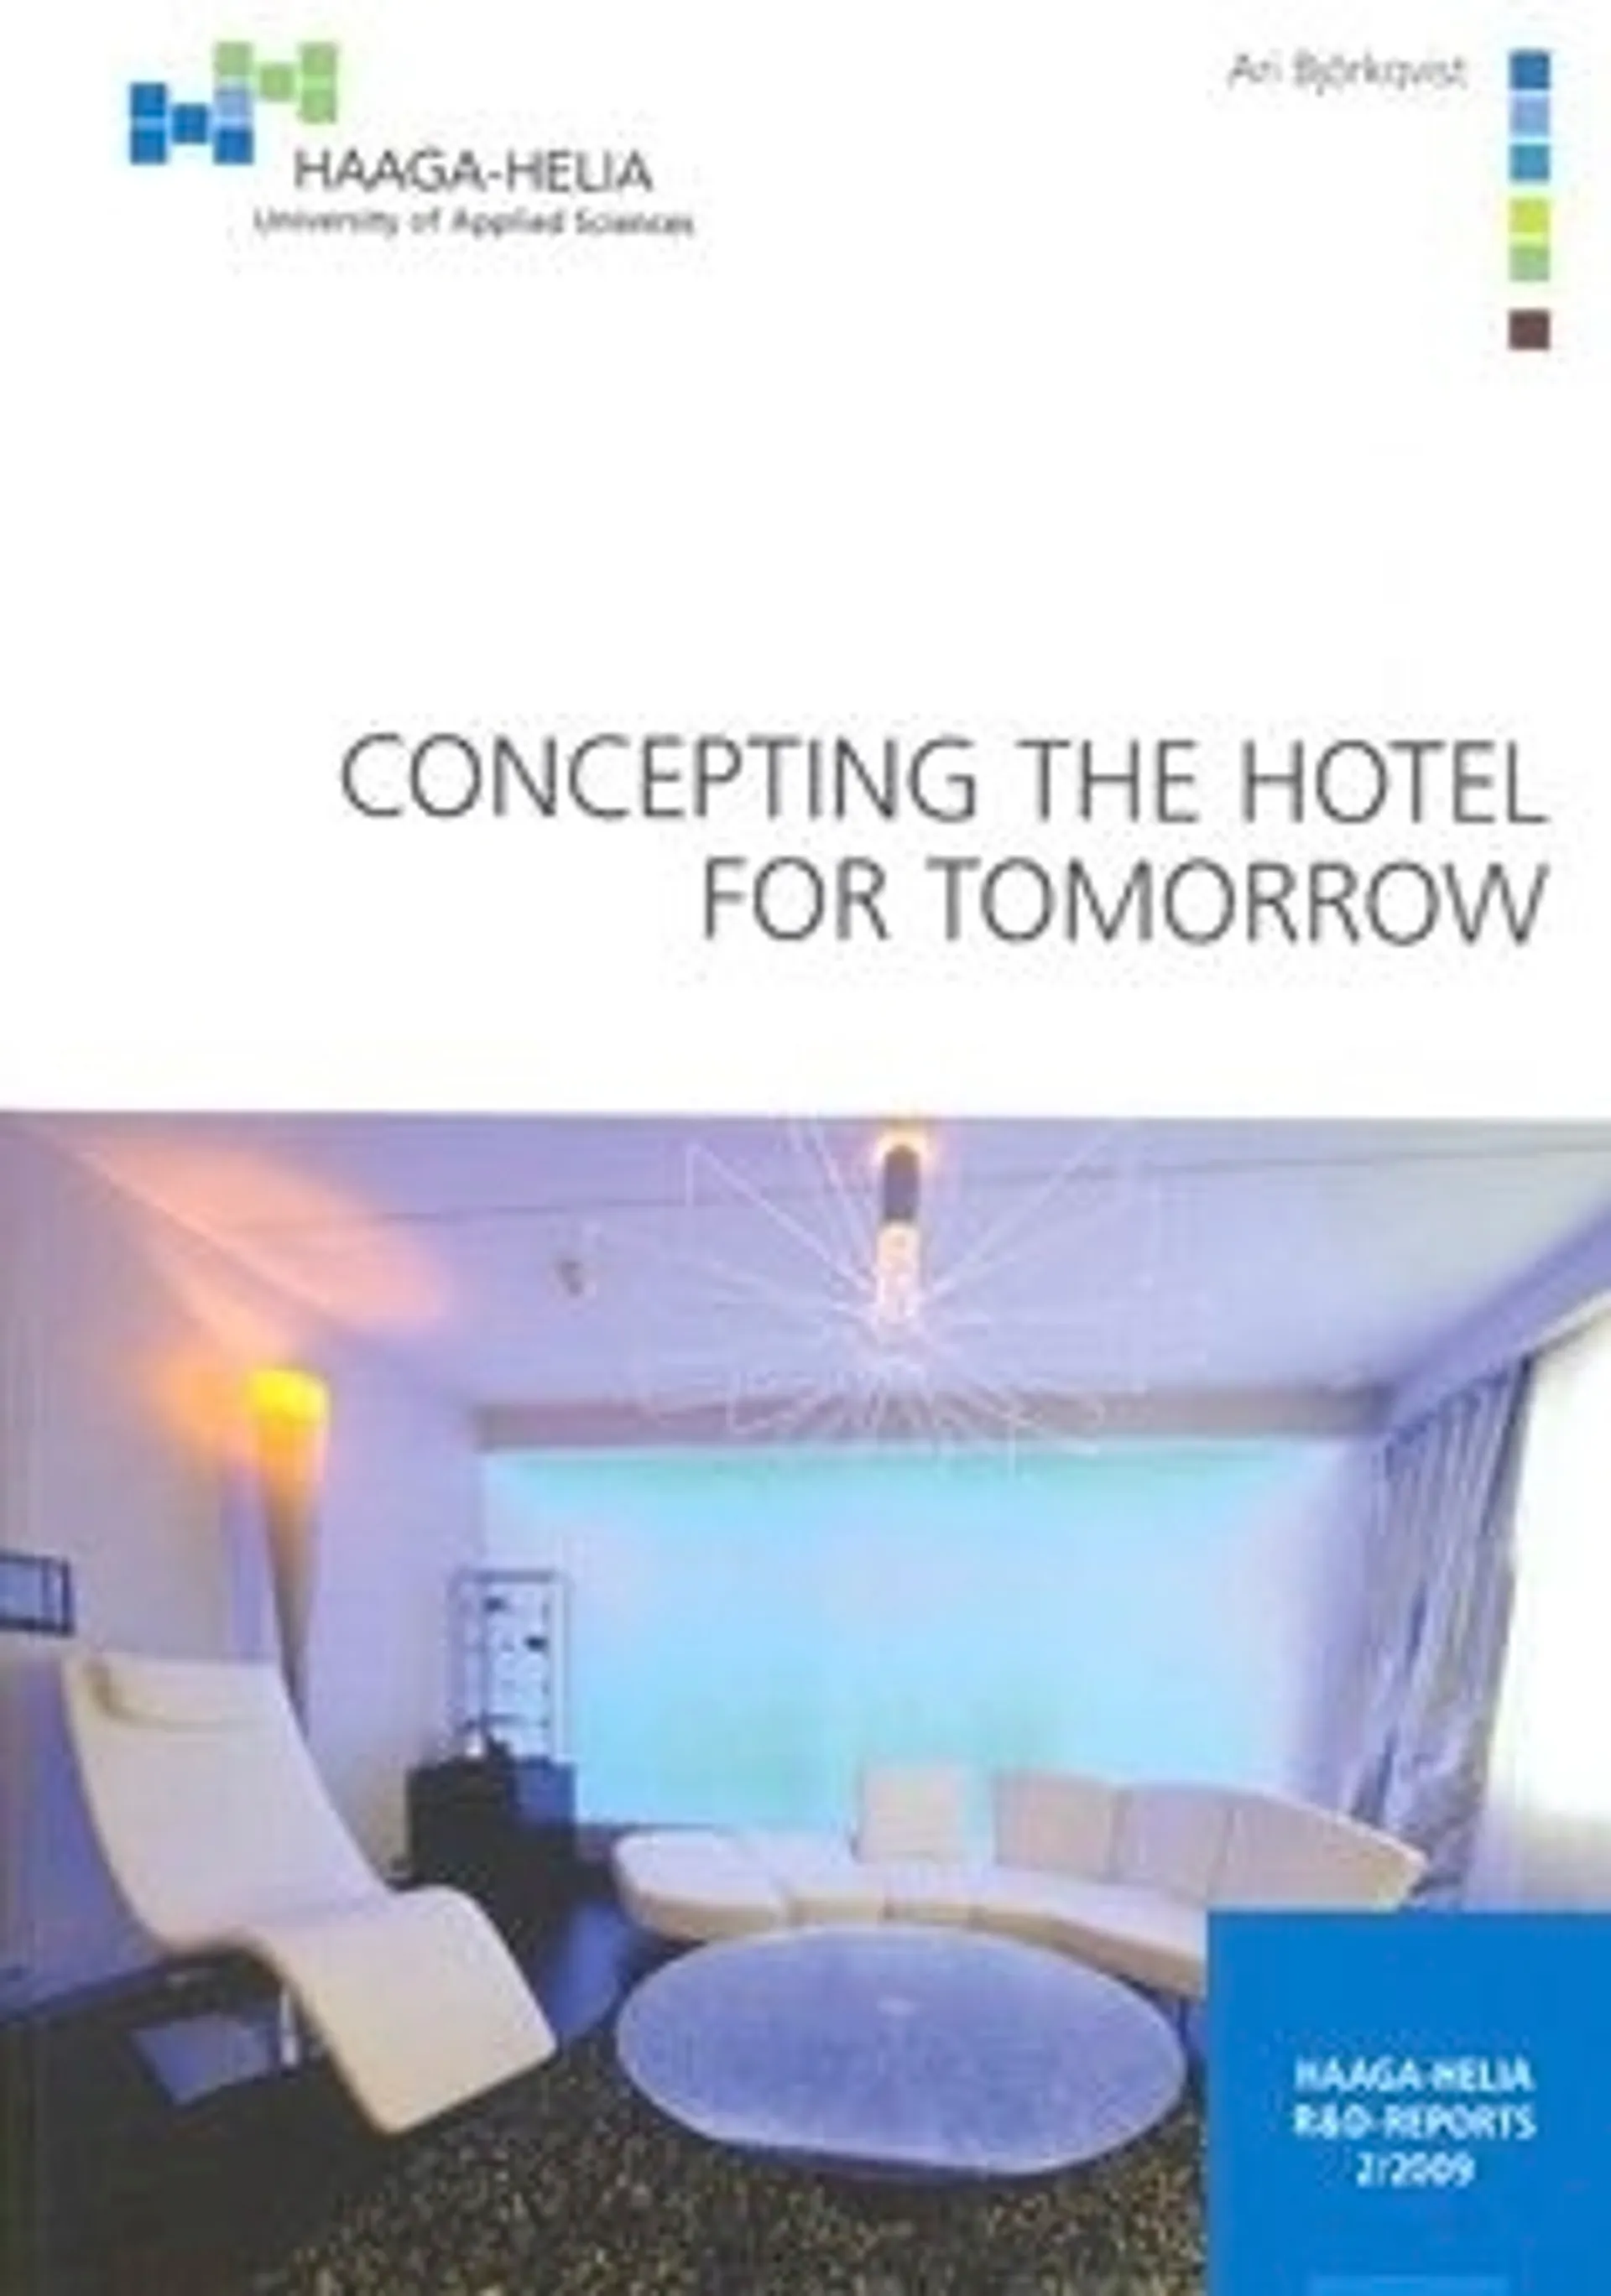 Björkvist, Concepting the hotel for tomorrow